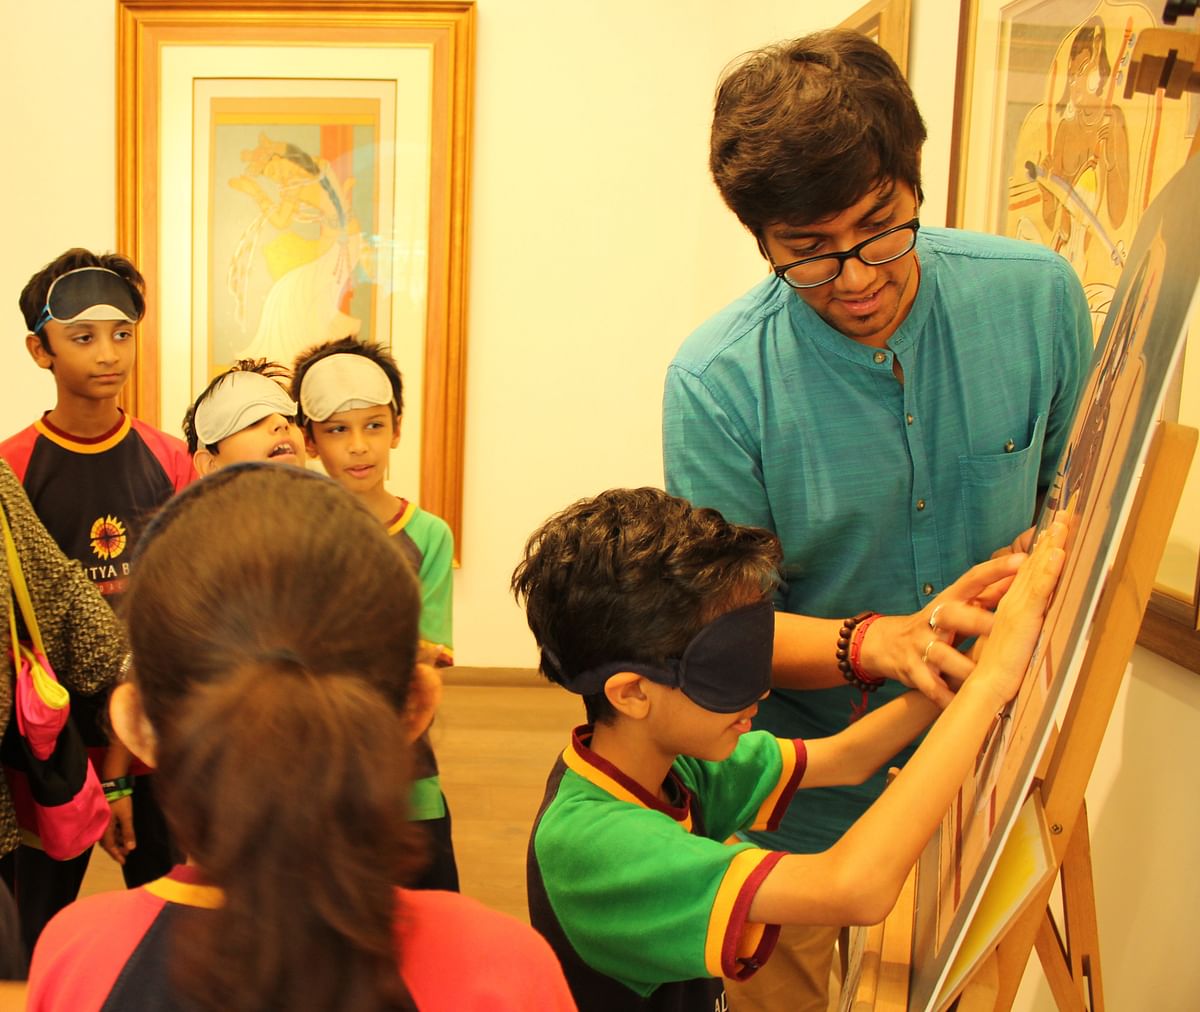 Siddhant Shah’s organisation guides the visually impaired and describes what they are touching to them.